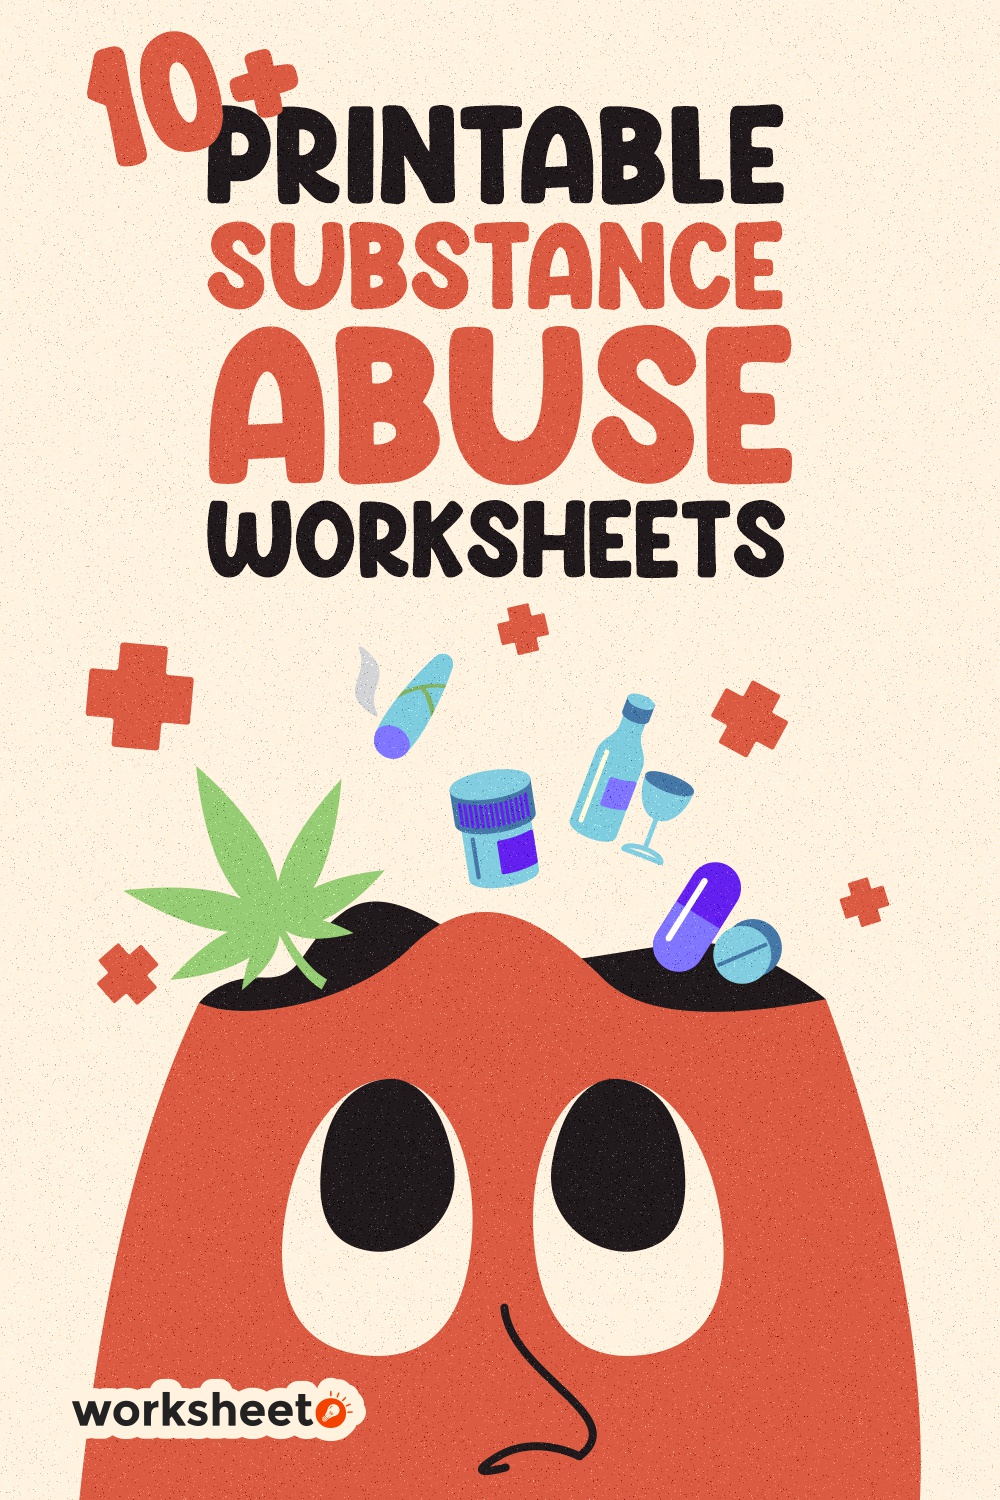 20 Images of Printable Substance Abuse Worksheets